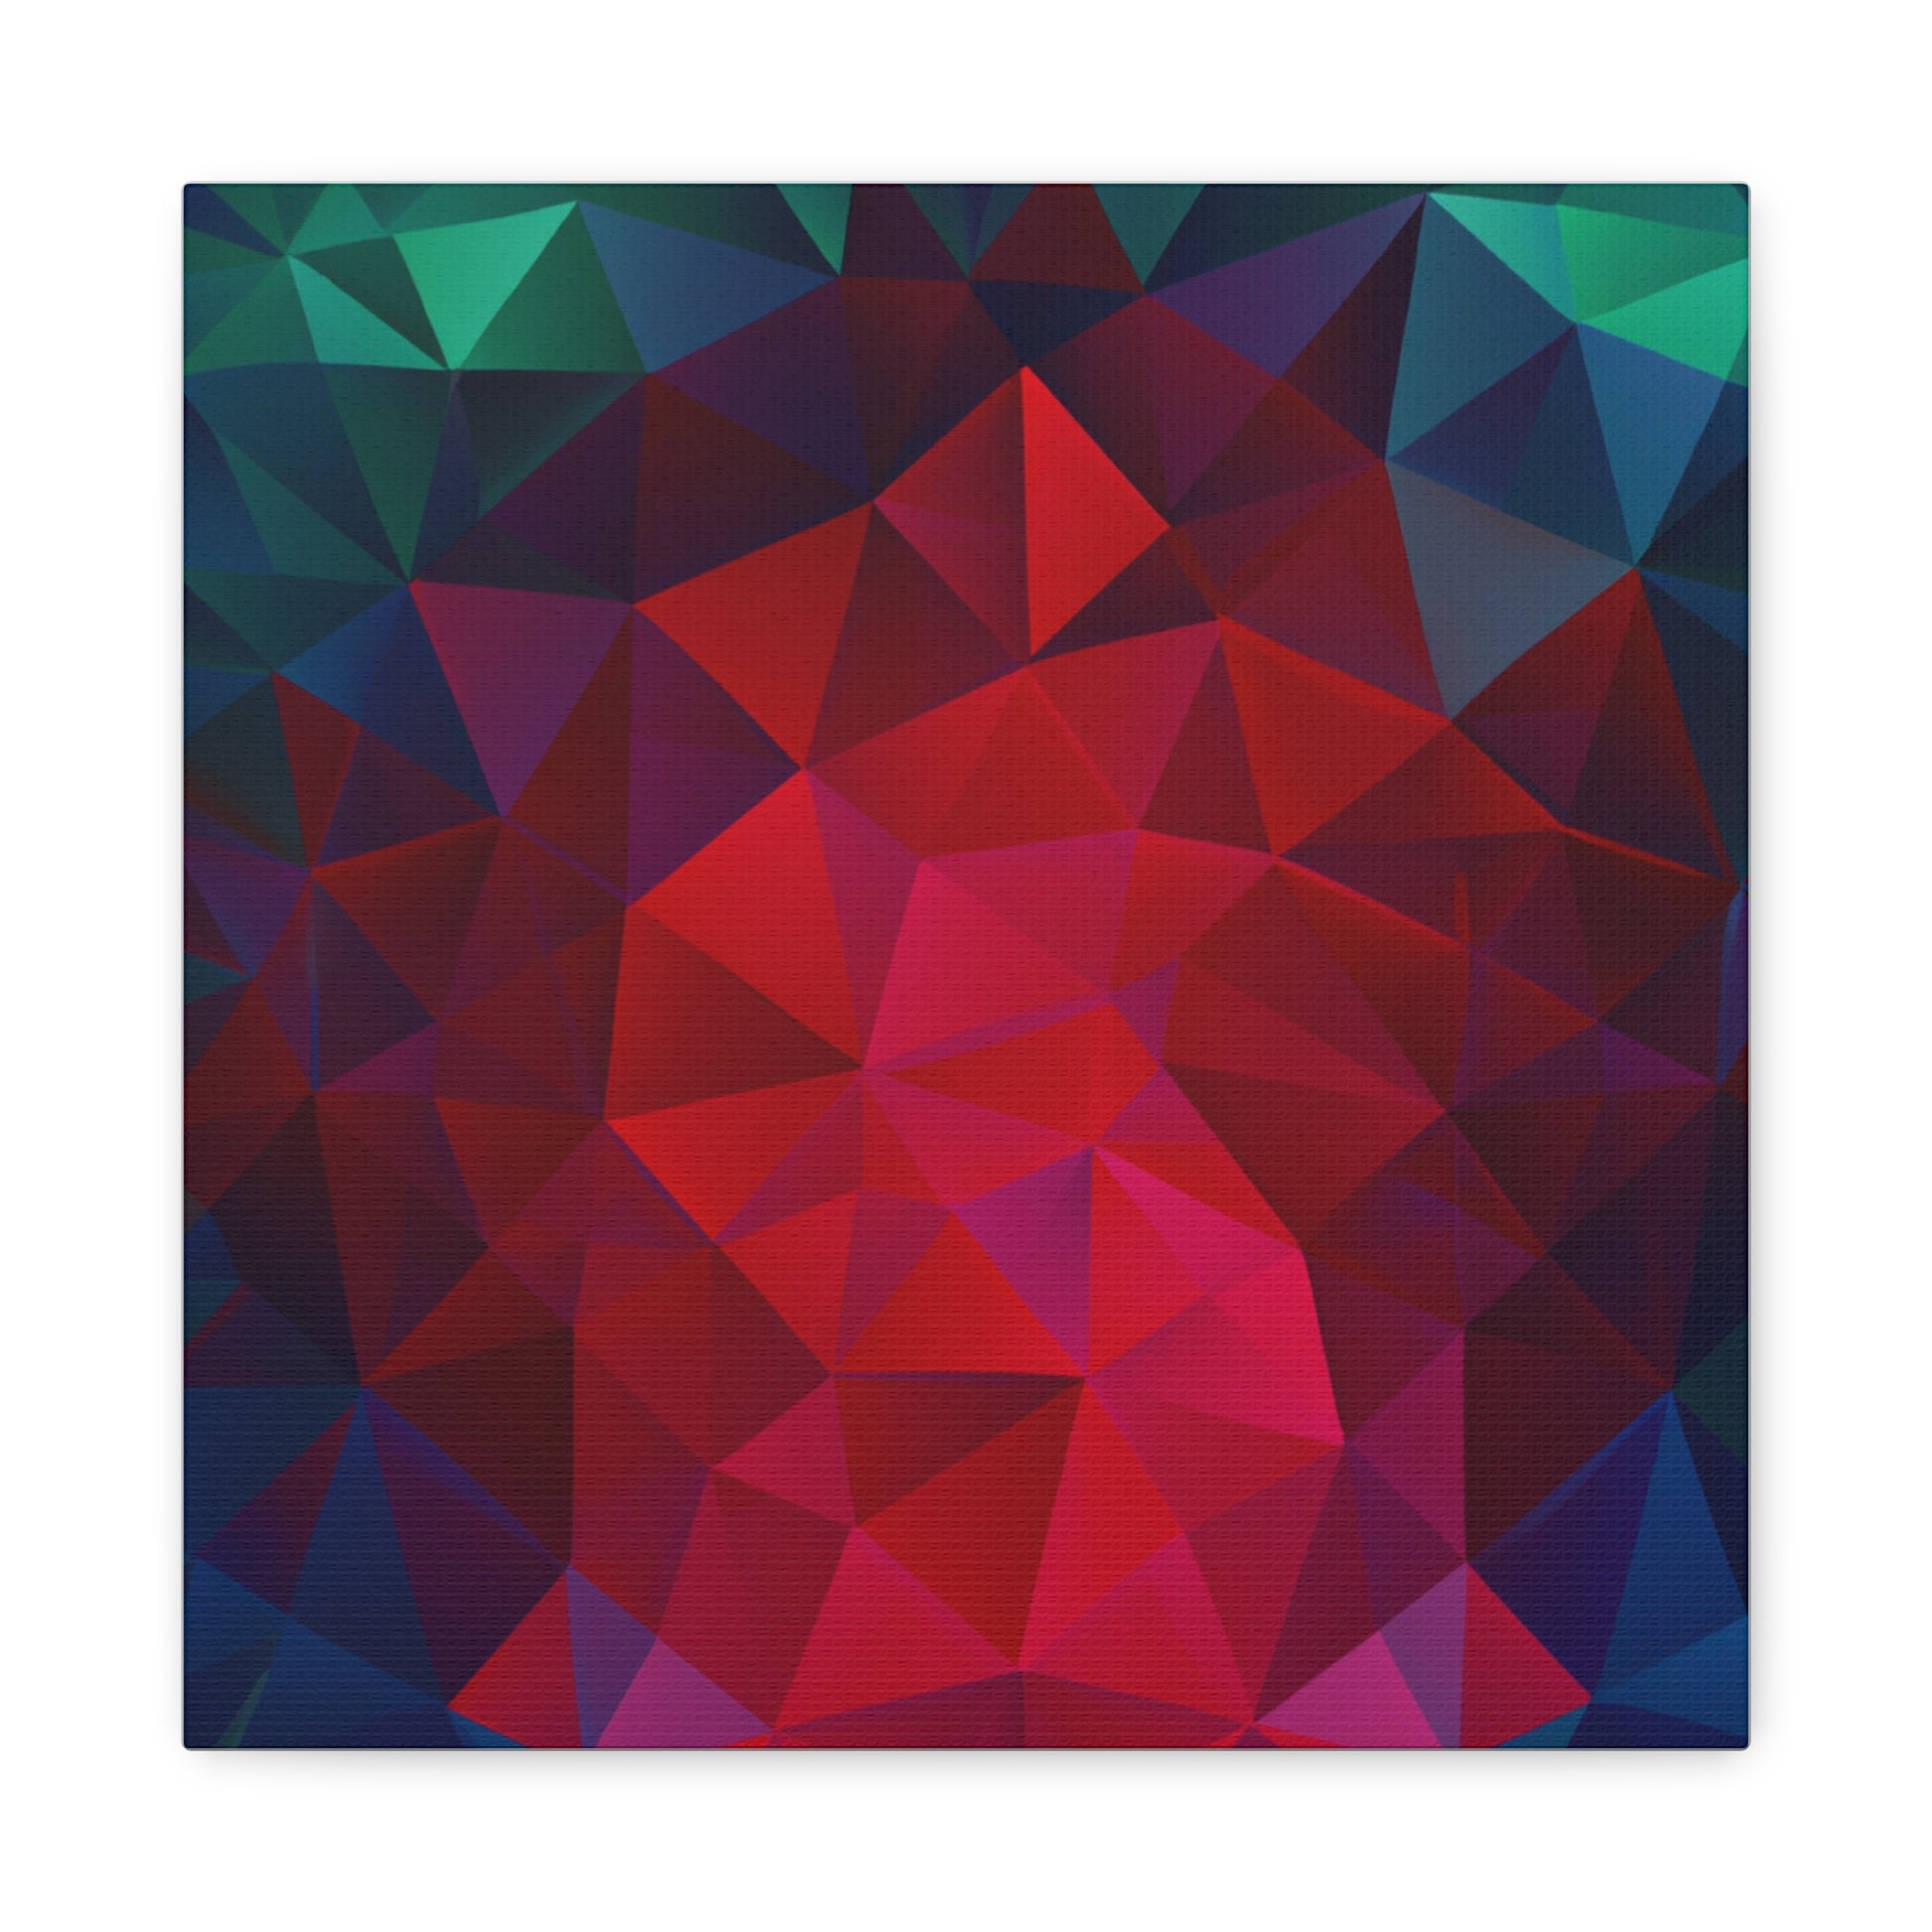 Abstract Digital Art Low-poly Style Decor Hanging Wall Painting Canvas Wall Art Print